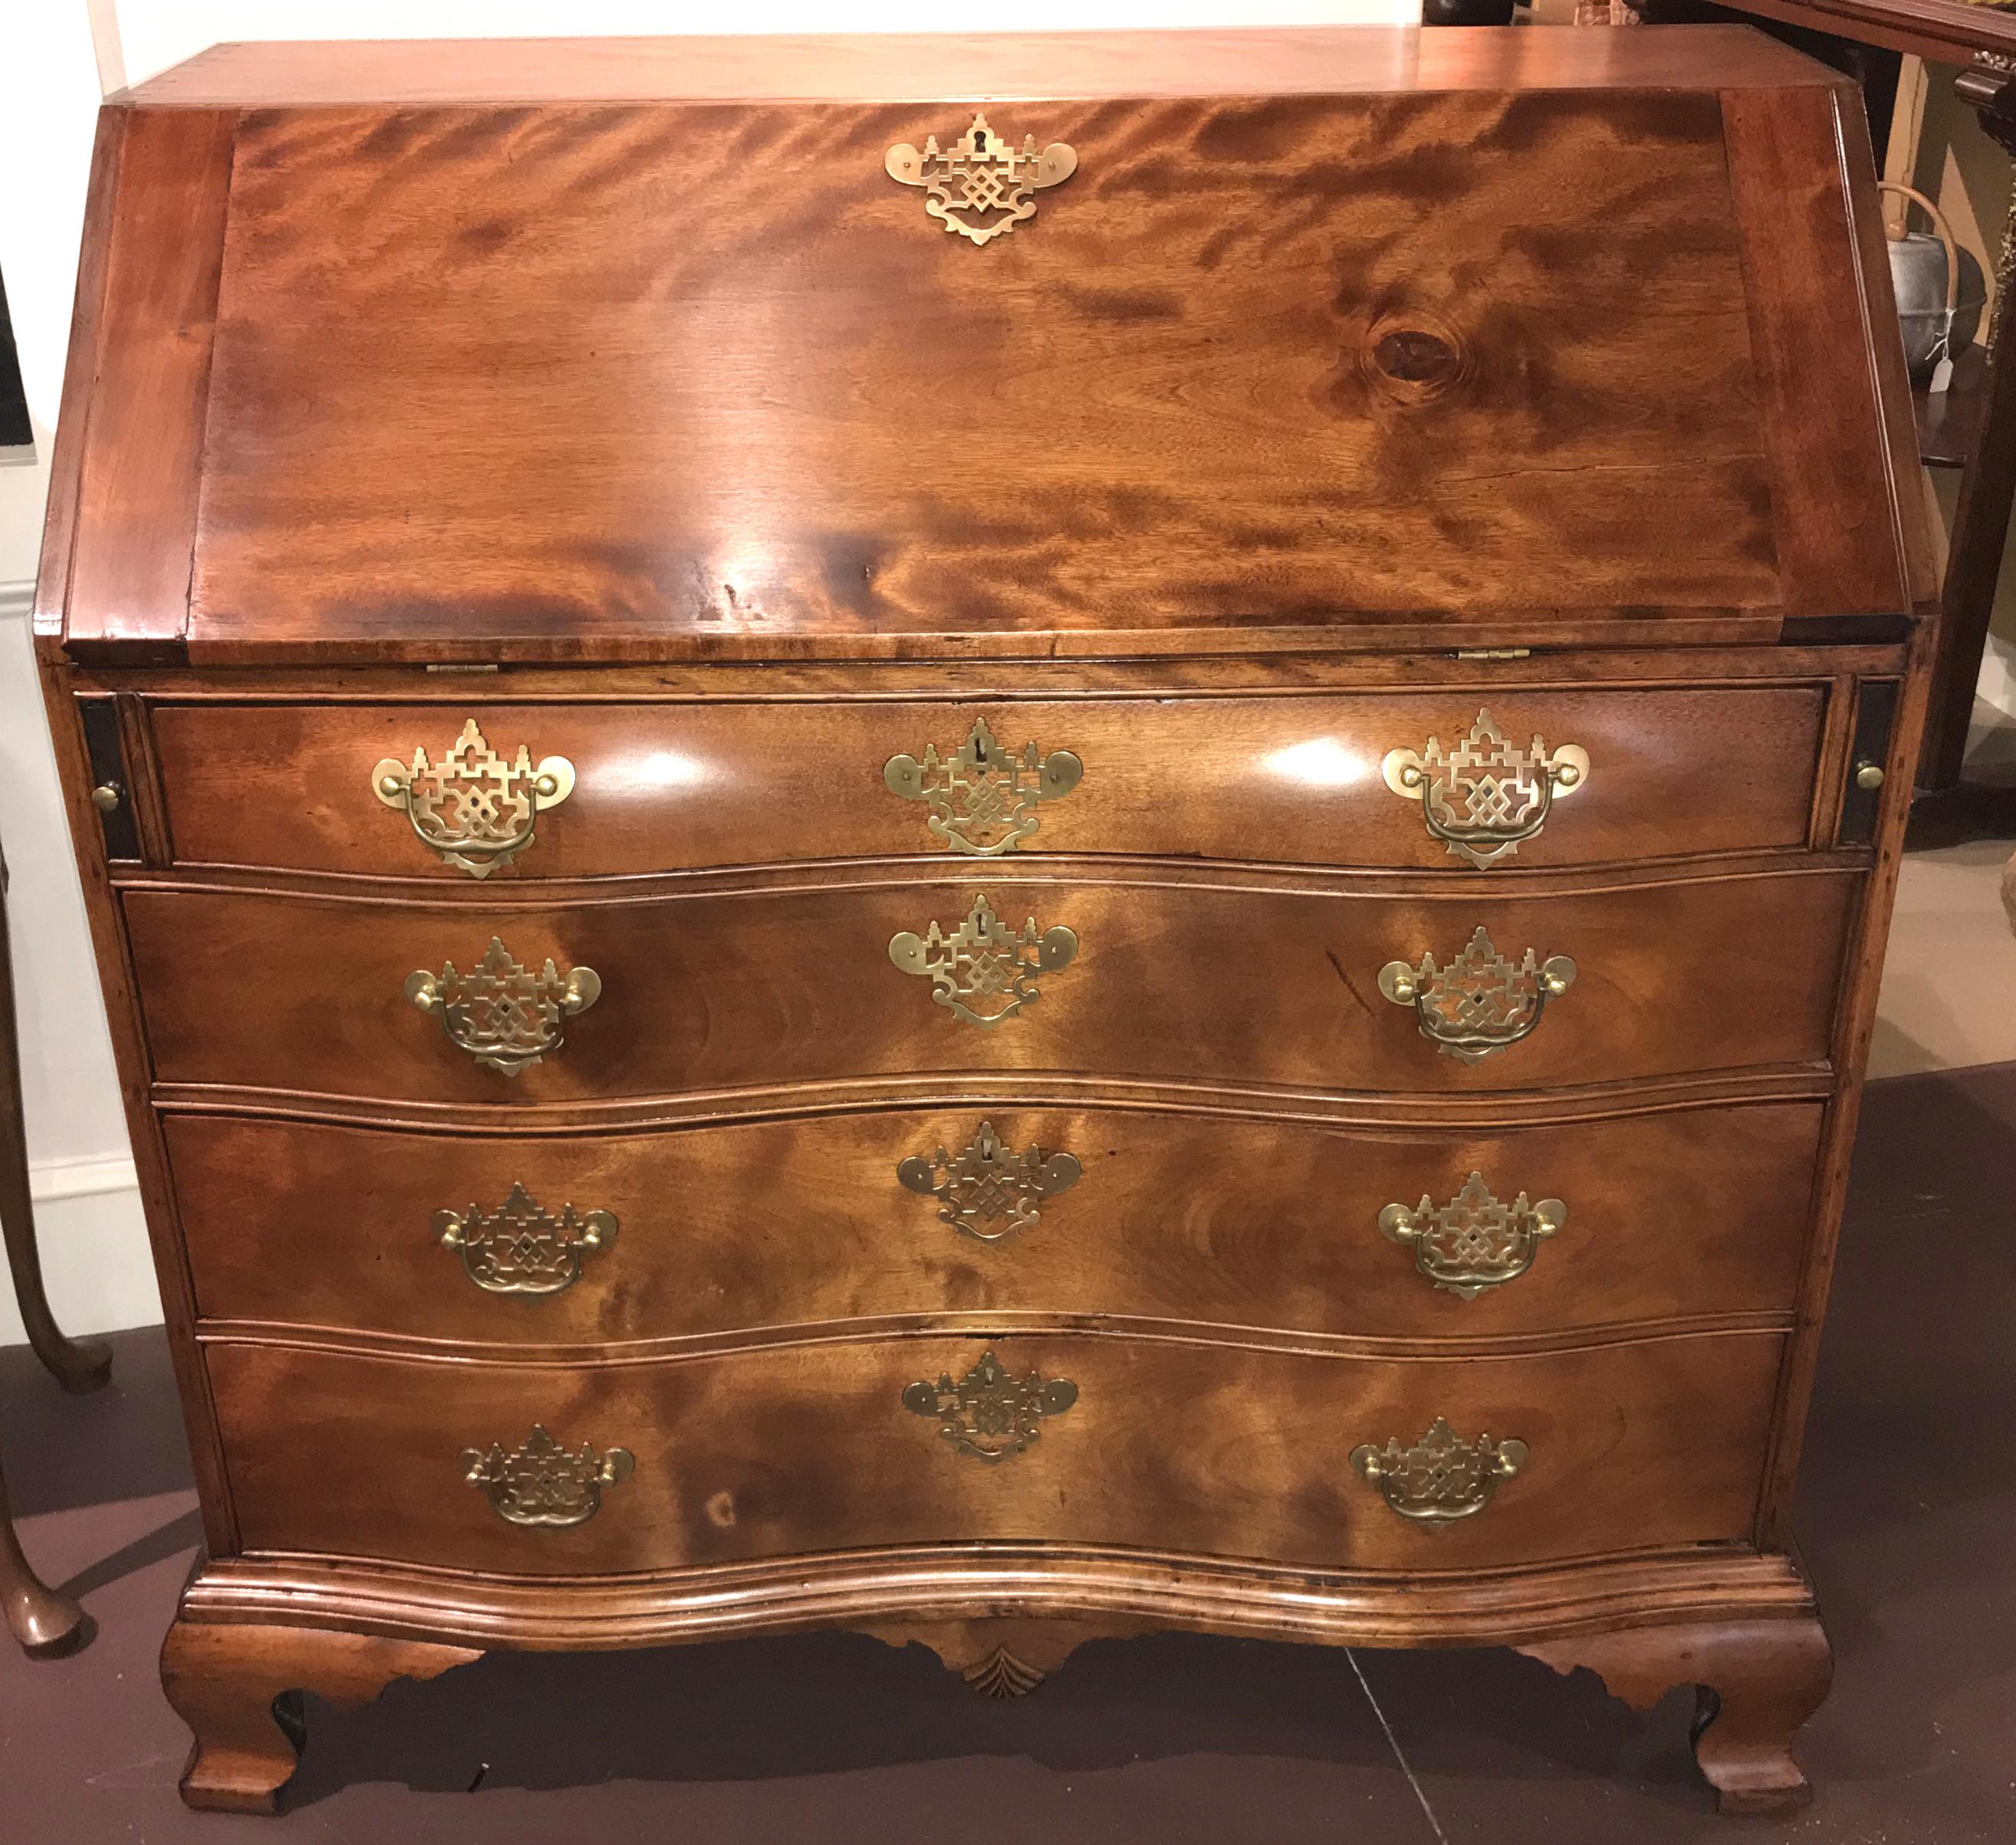 A fine 18th century American oxbow form slant front desk in flame birch with a compartmentalized interior featuring three radial fan carved drawer fronts and four valanced open cubbies, surmounting two graduated rows of fitted drawers of various